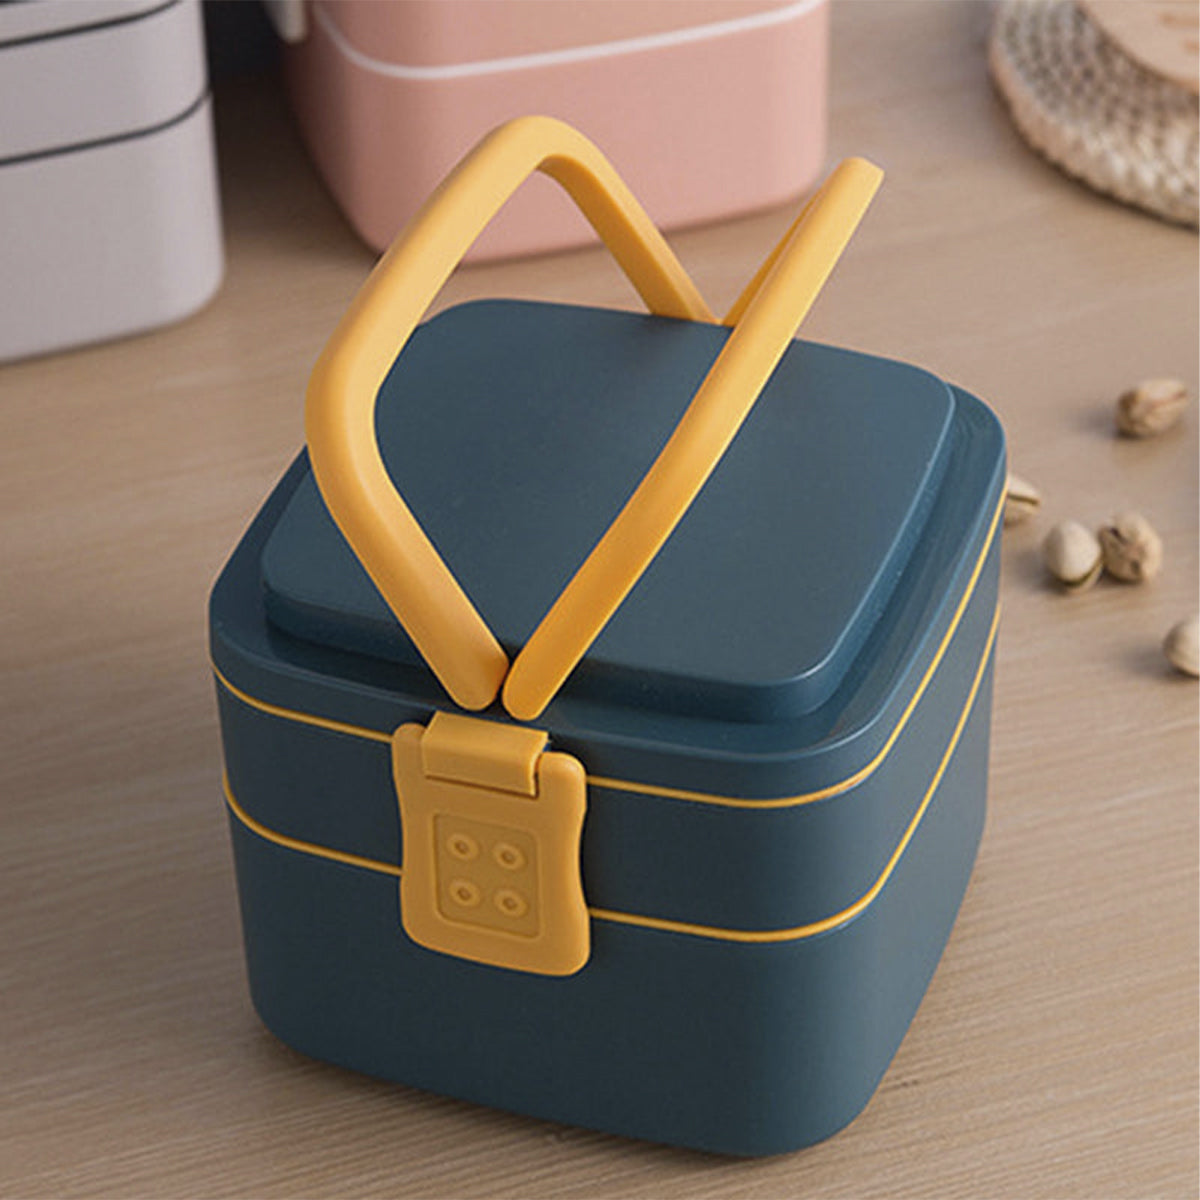 Portable 2 Layer Food Container